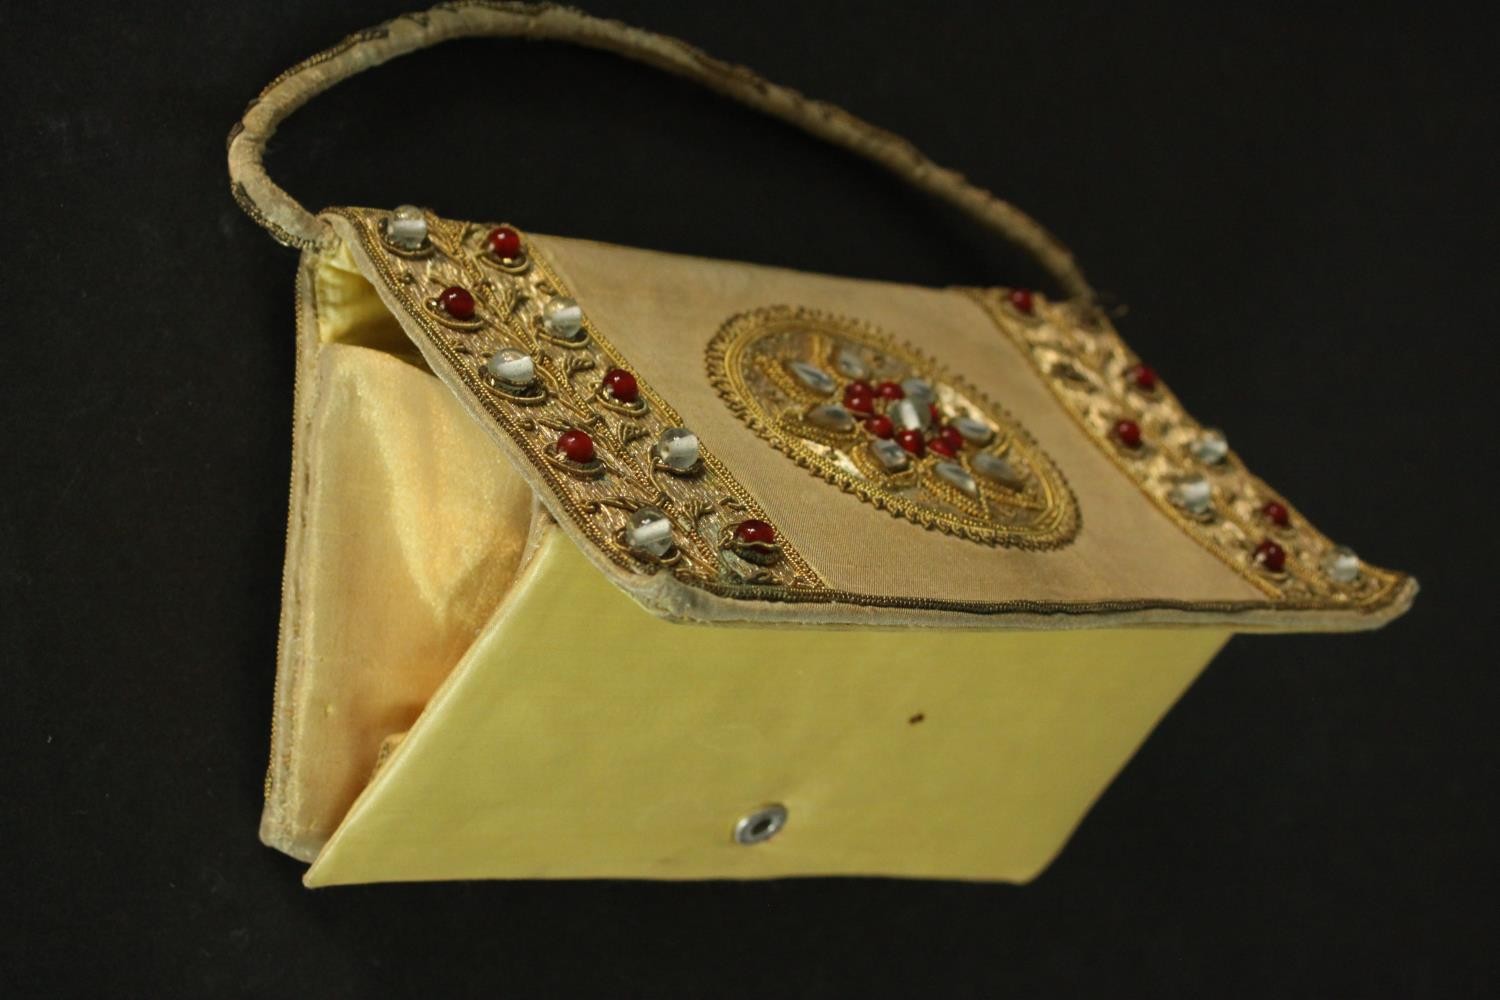 Two vintage clutch handbags, including an Indian gold brocade and glass cabochon detailed evening - Image 10 of 10